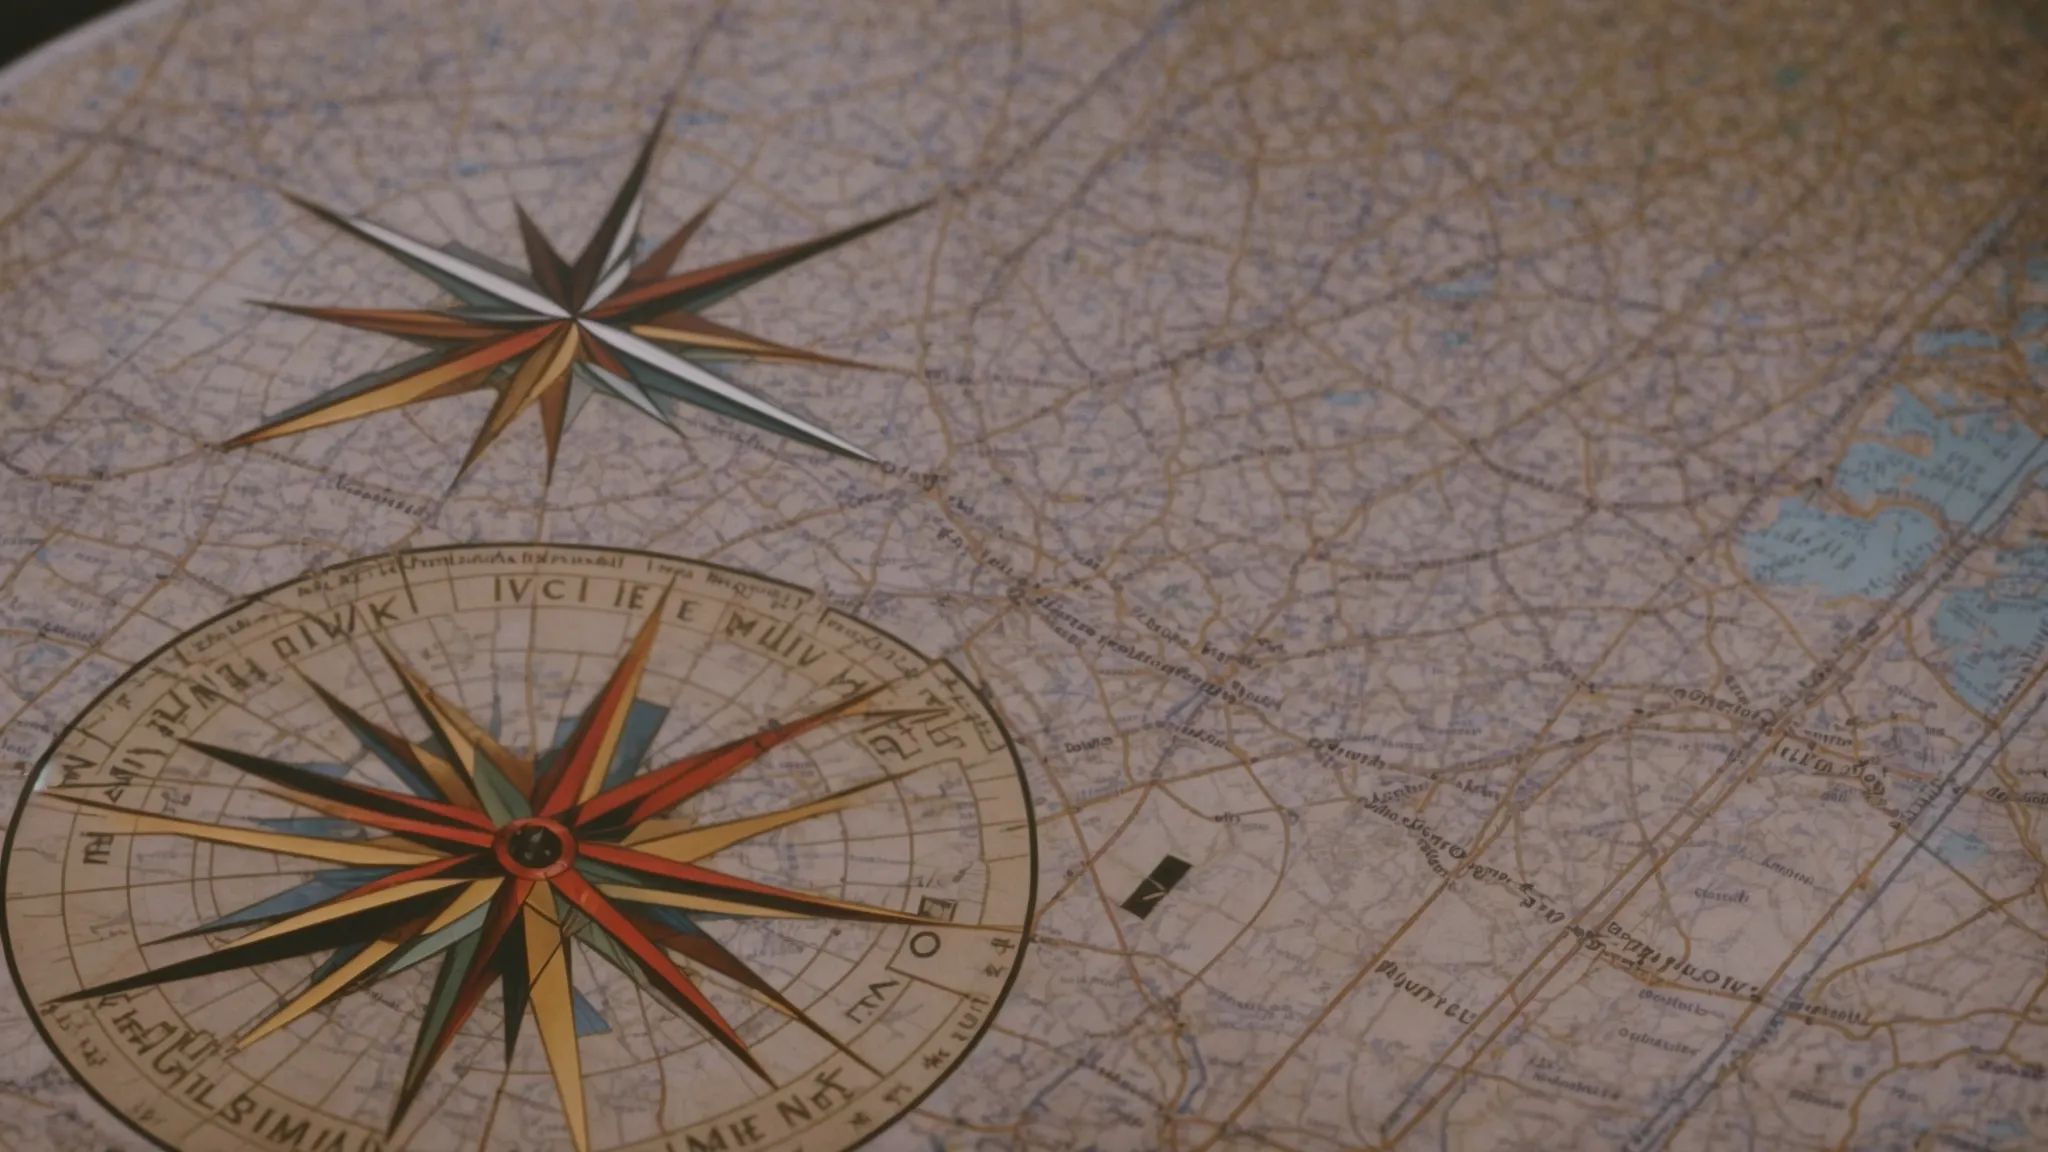 a compass on top of a map indicating different local landmarks.